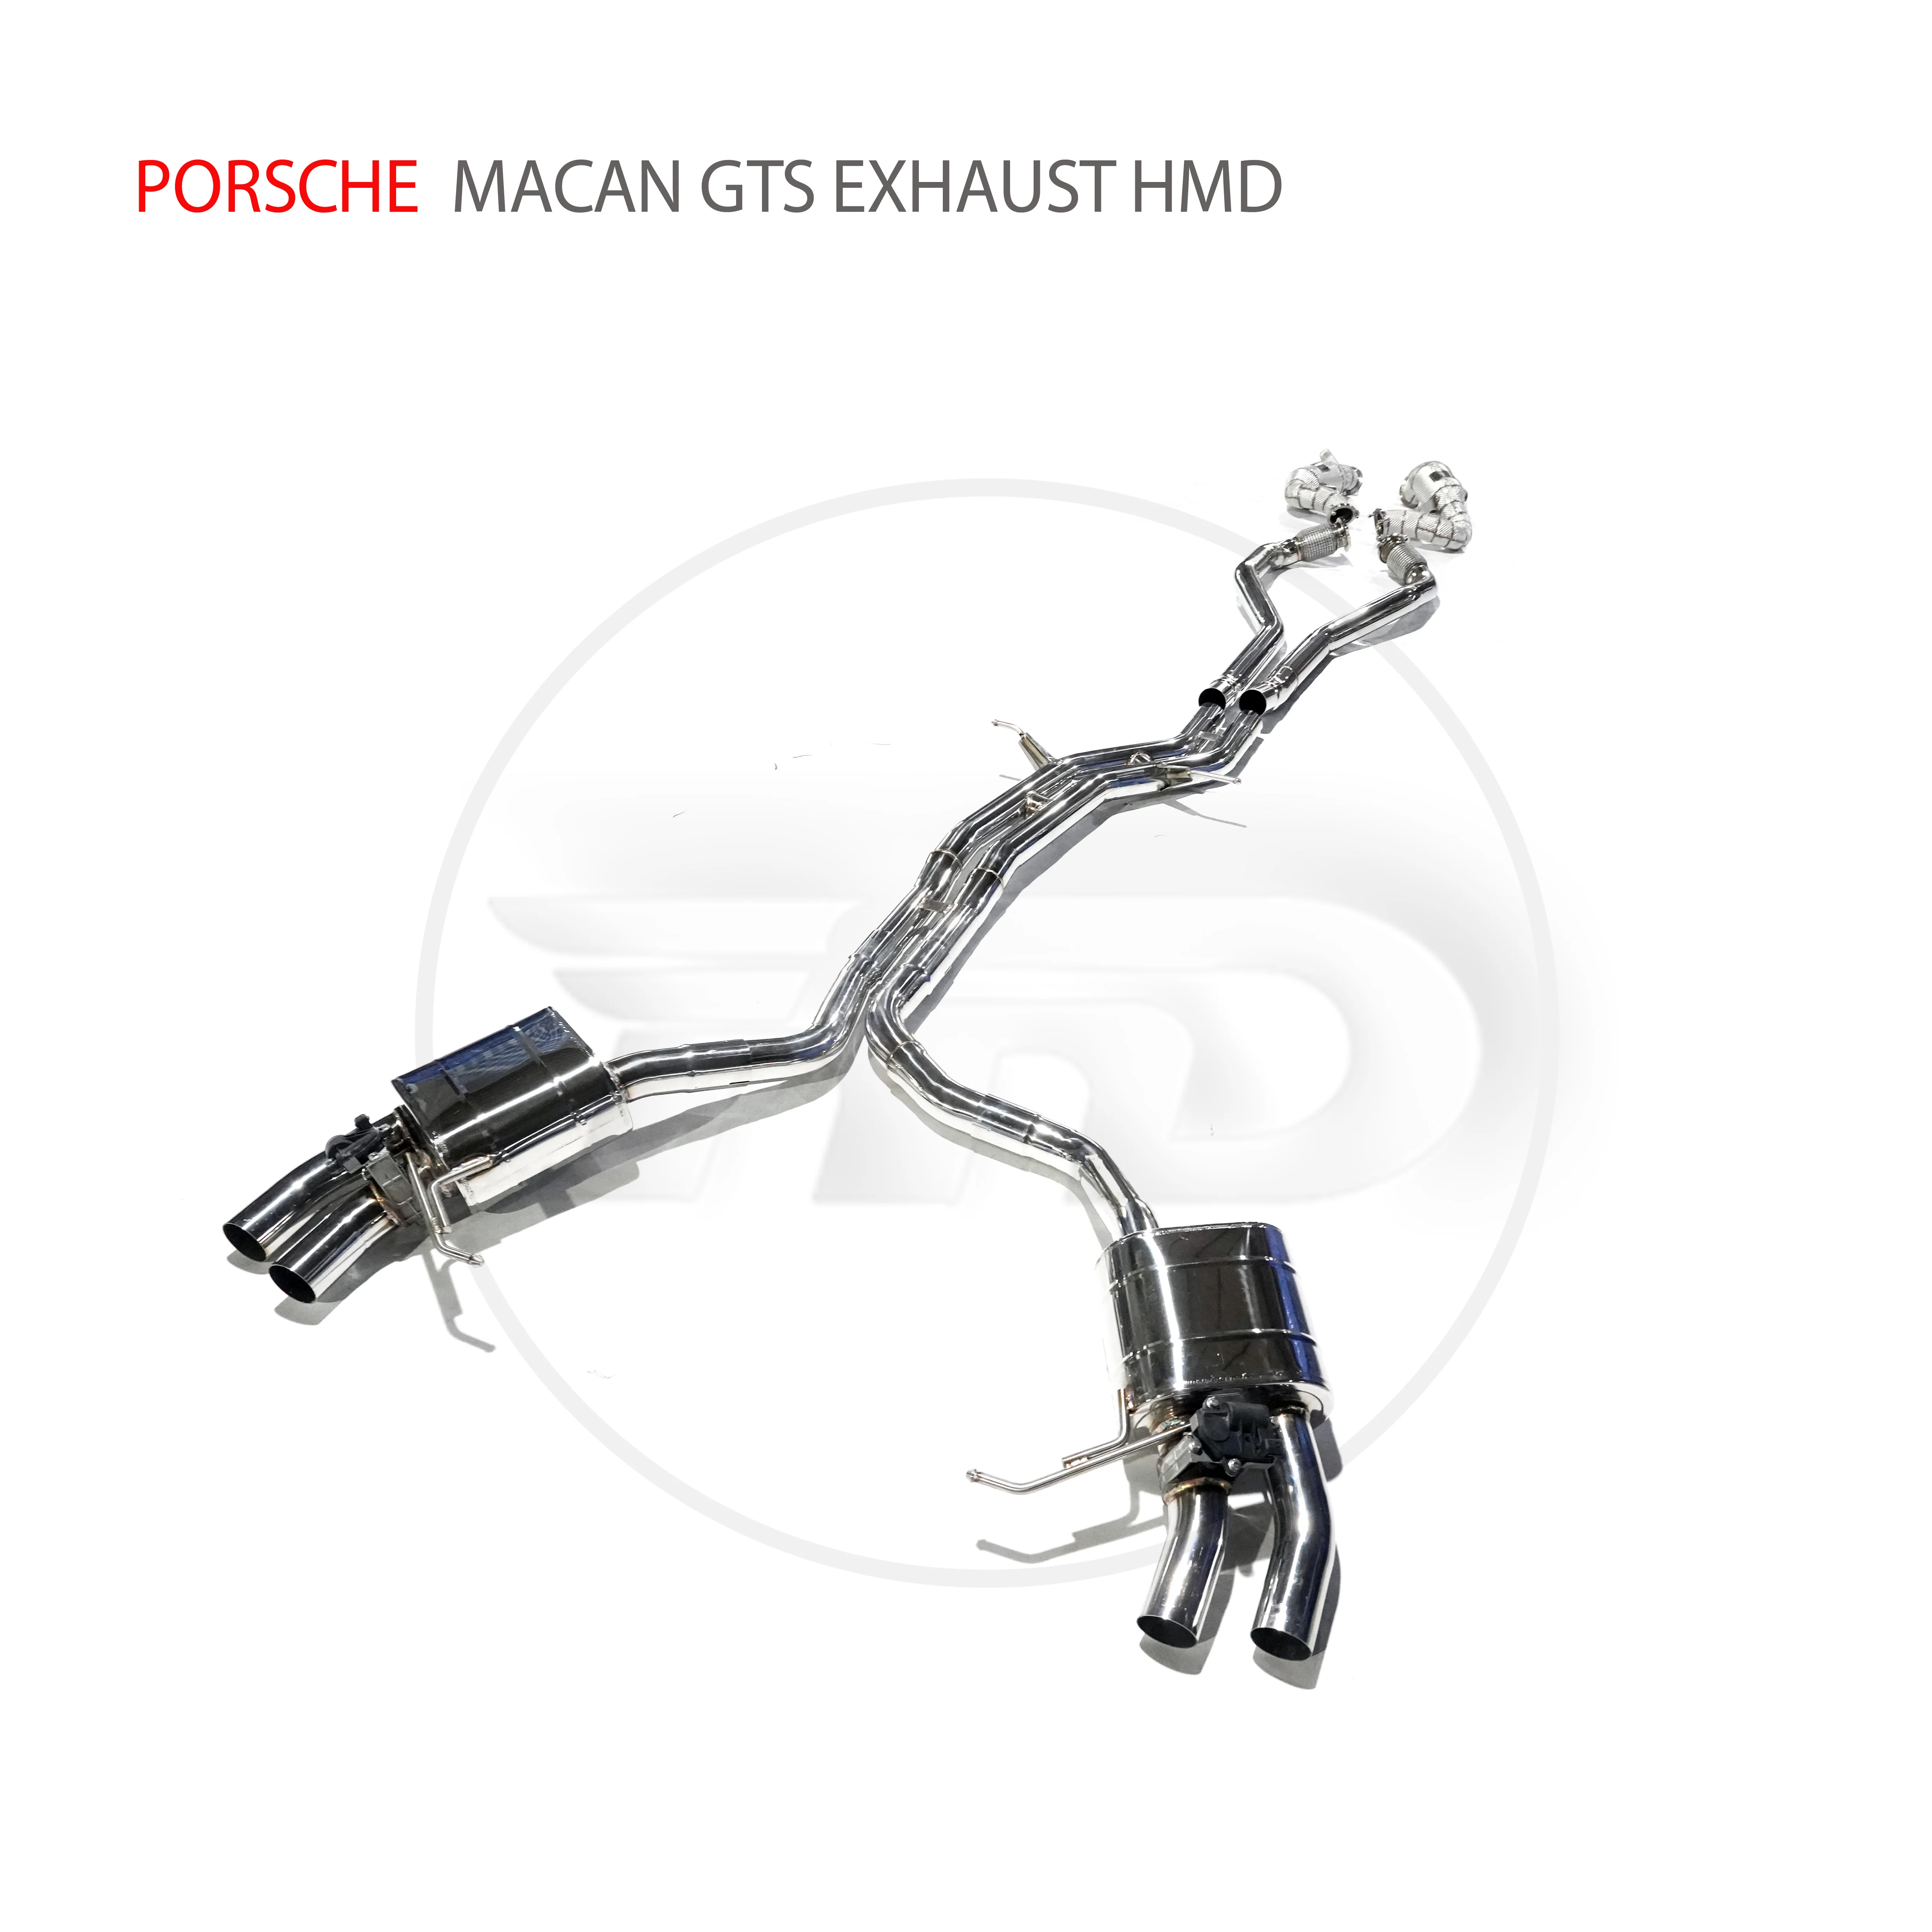 

HMD Stainless Steel Exhaust System Downpipe And Catback Is Suitable For Porsche Macan GTS Modification Electronic Valve